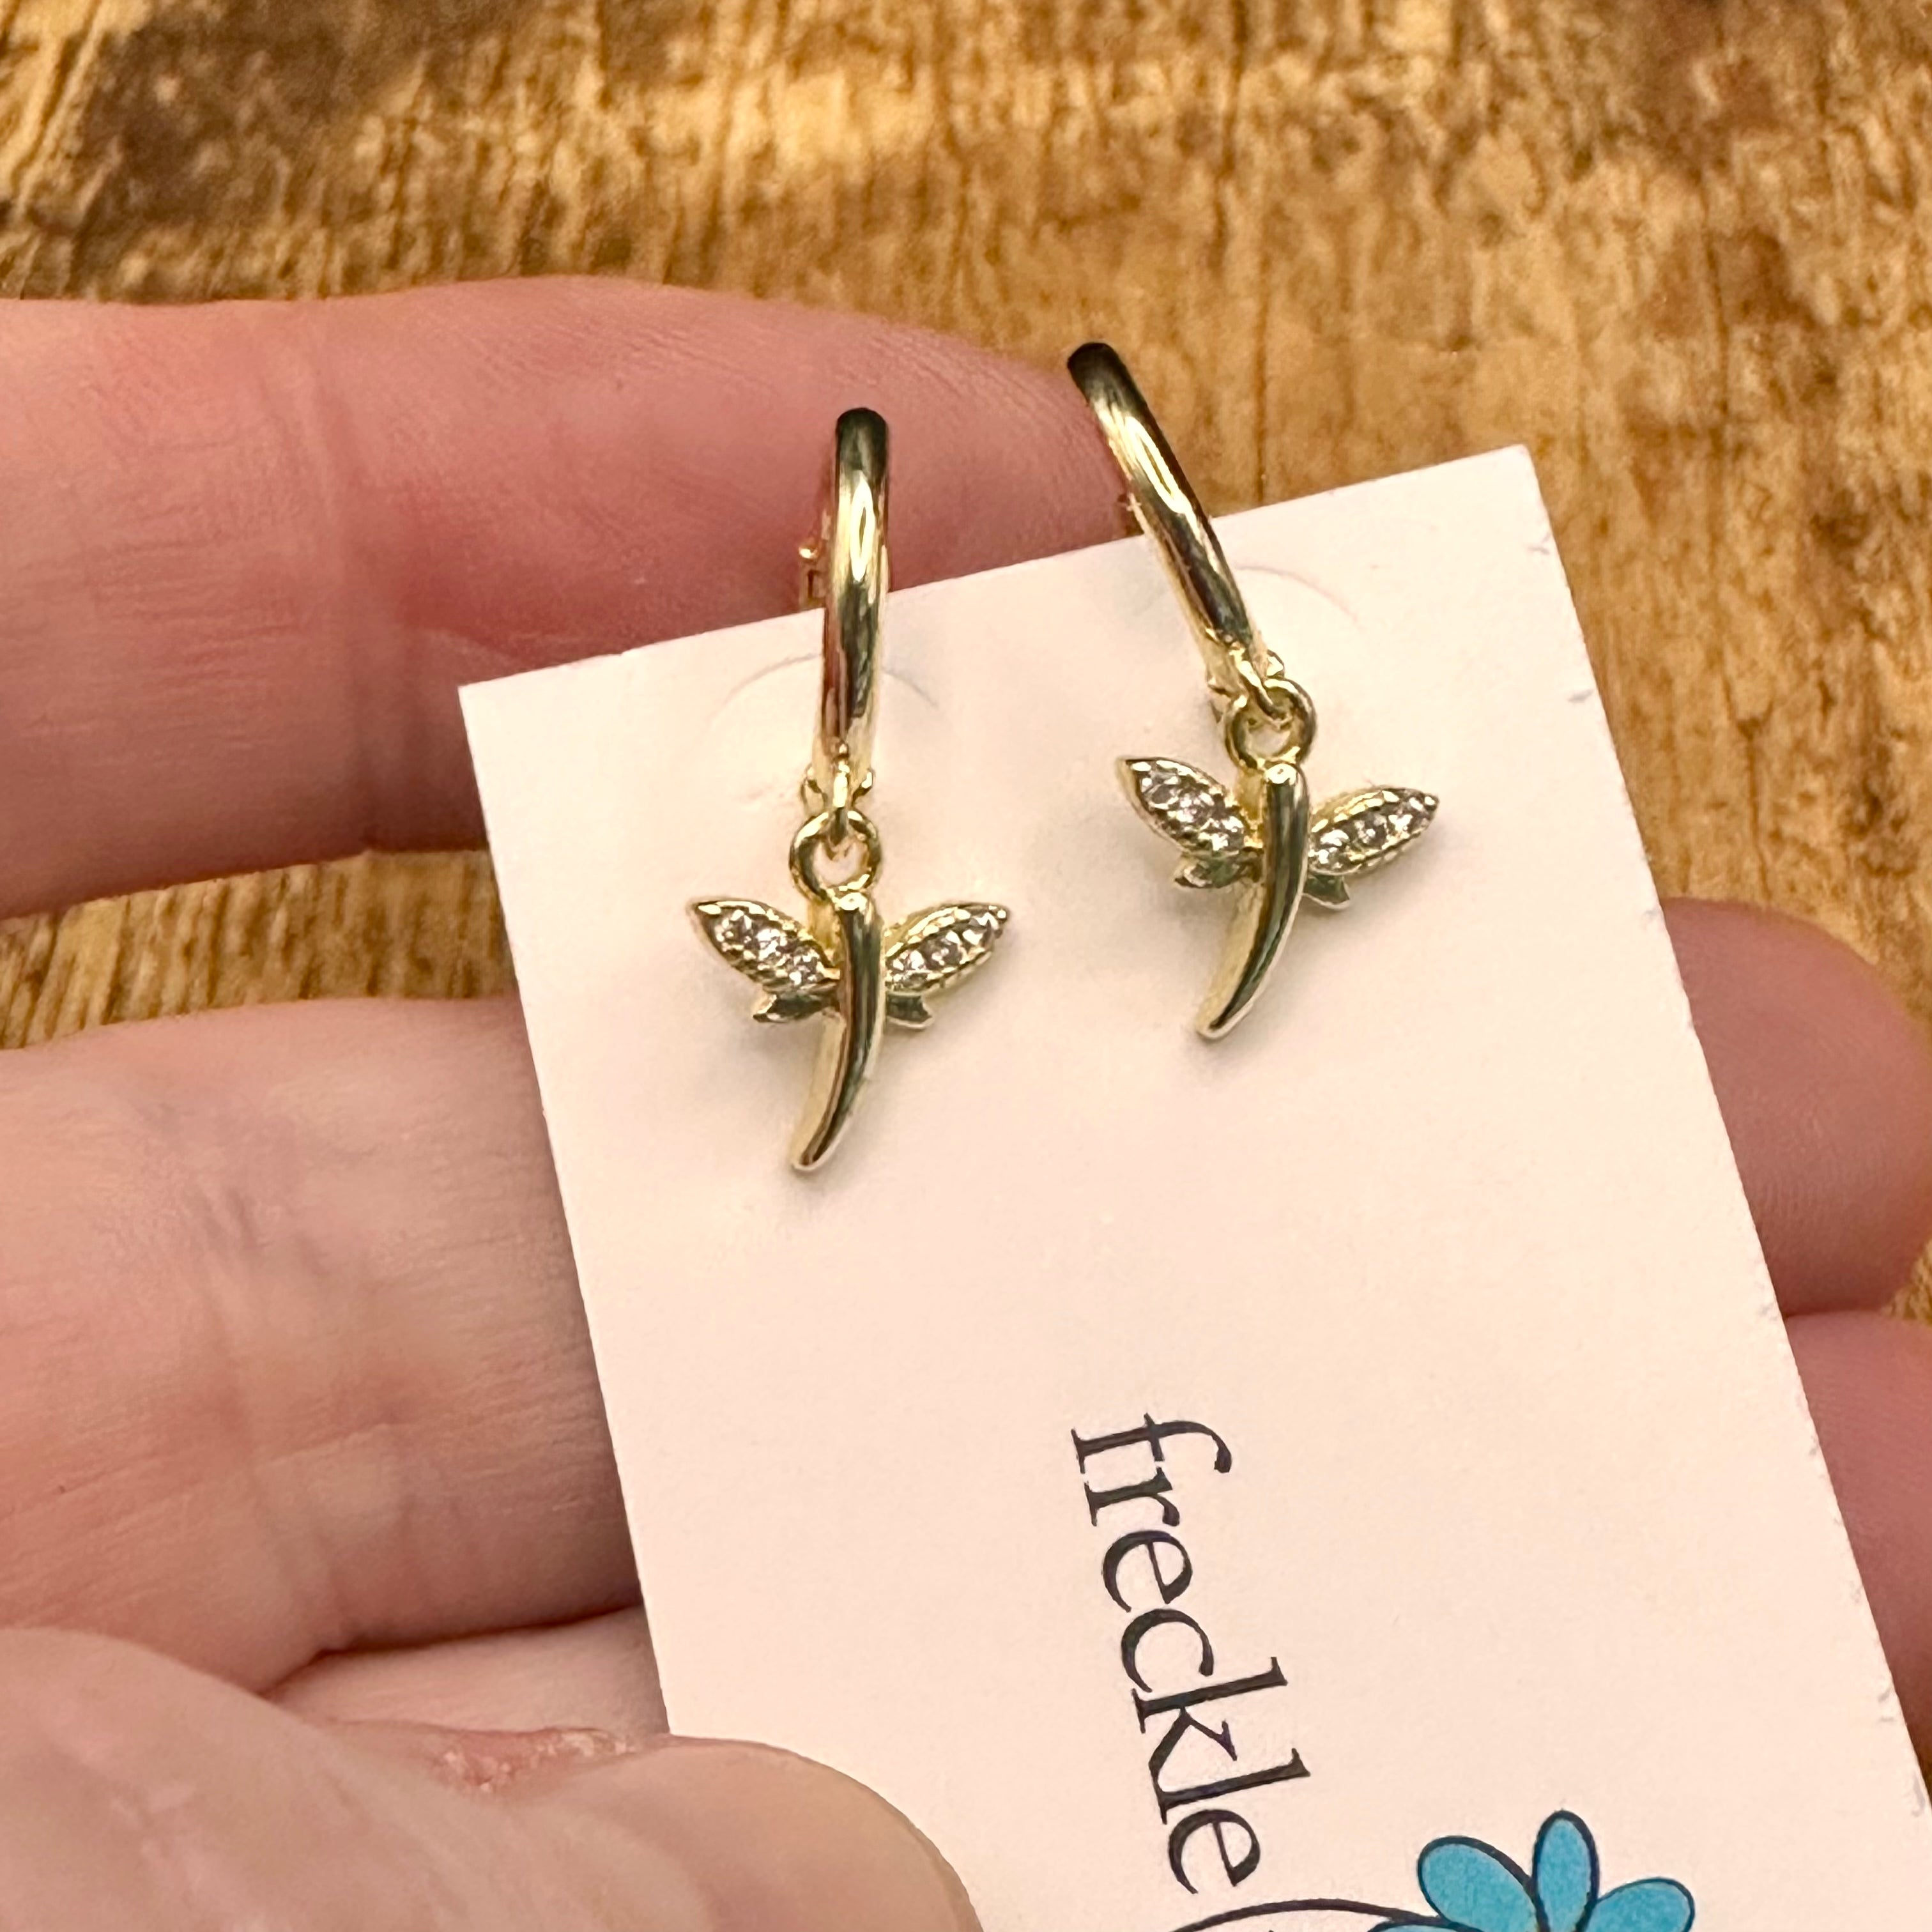 Tiny Hoop with Charm Earrings - Dragonflies